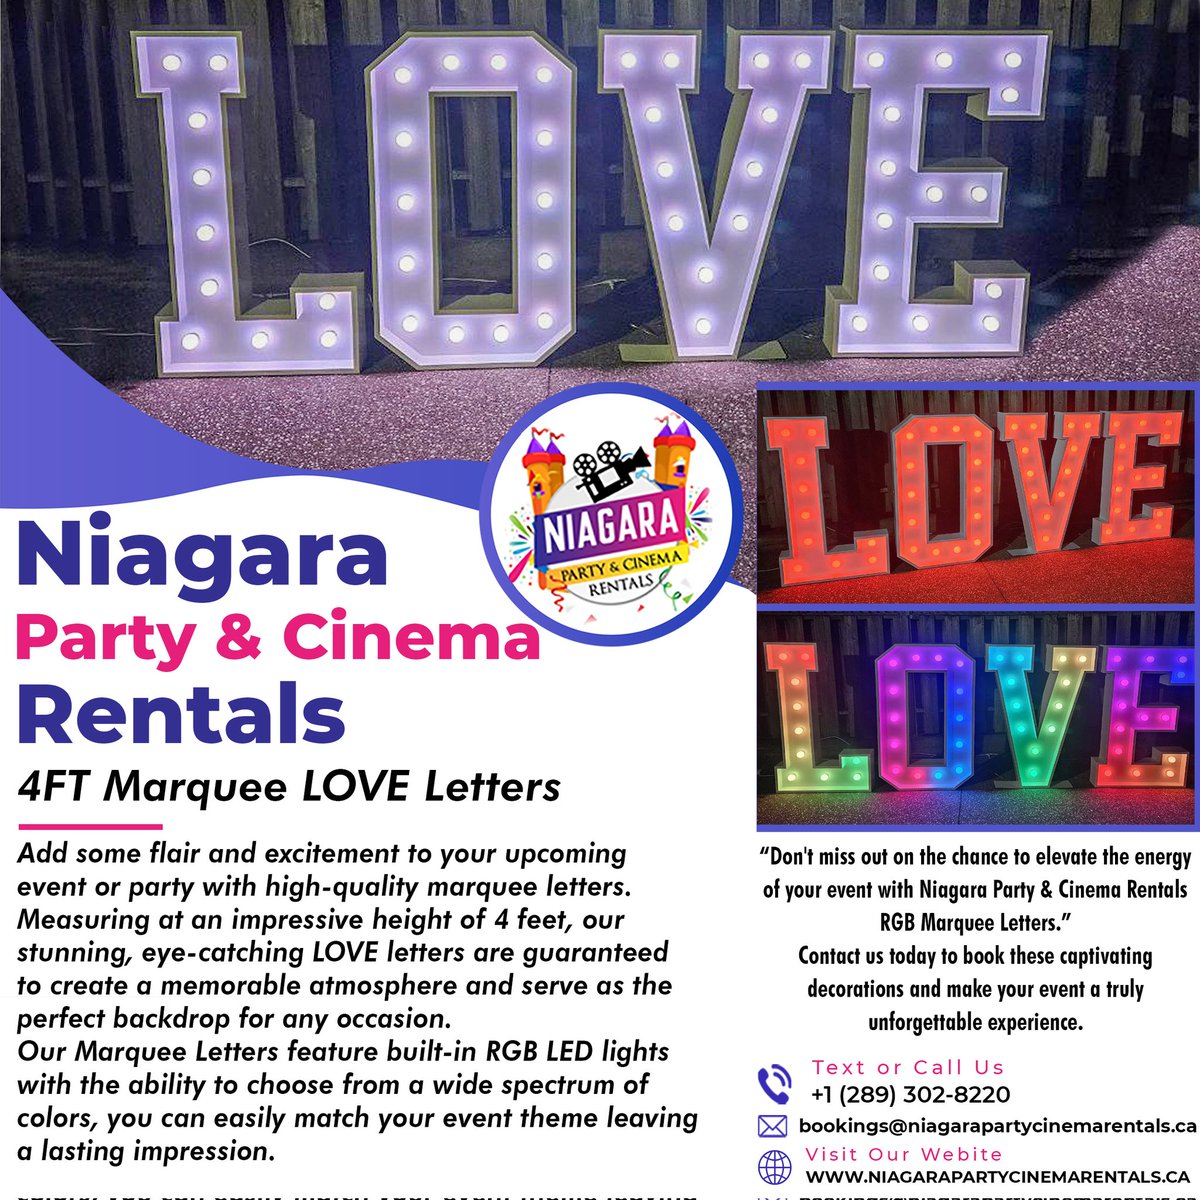 💥 Niagara Party & Cinema Rentals is now offering 4FT LOVE Marquee Letters! 💥

Light up your next event with our stunning 4ft RGB Marquee LOVE Letters!

#marqueerentals #niagaraevents #eventsniagarafalls #marqueeniagara #eventrentalsniagara #marqueeletters #marqueelighting